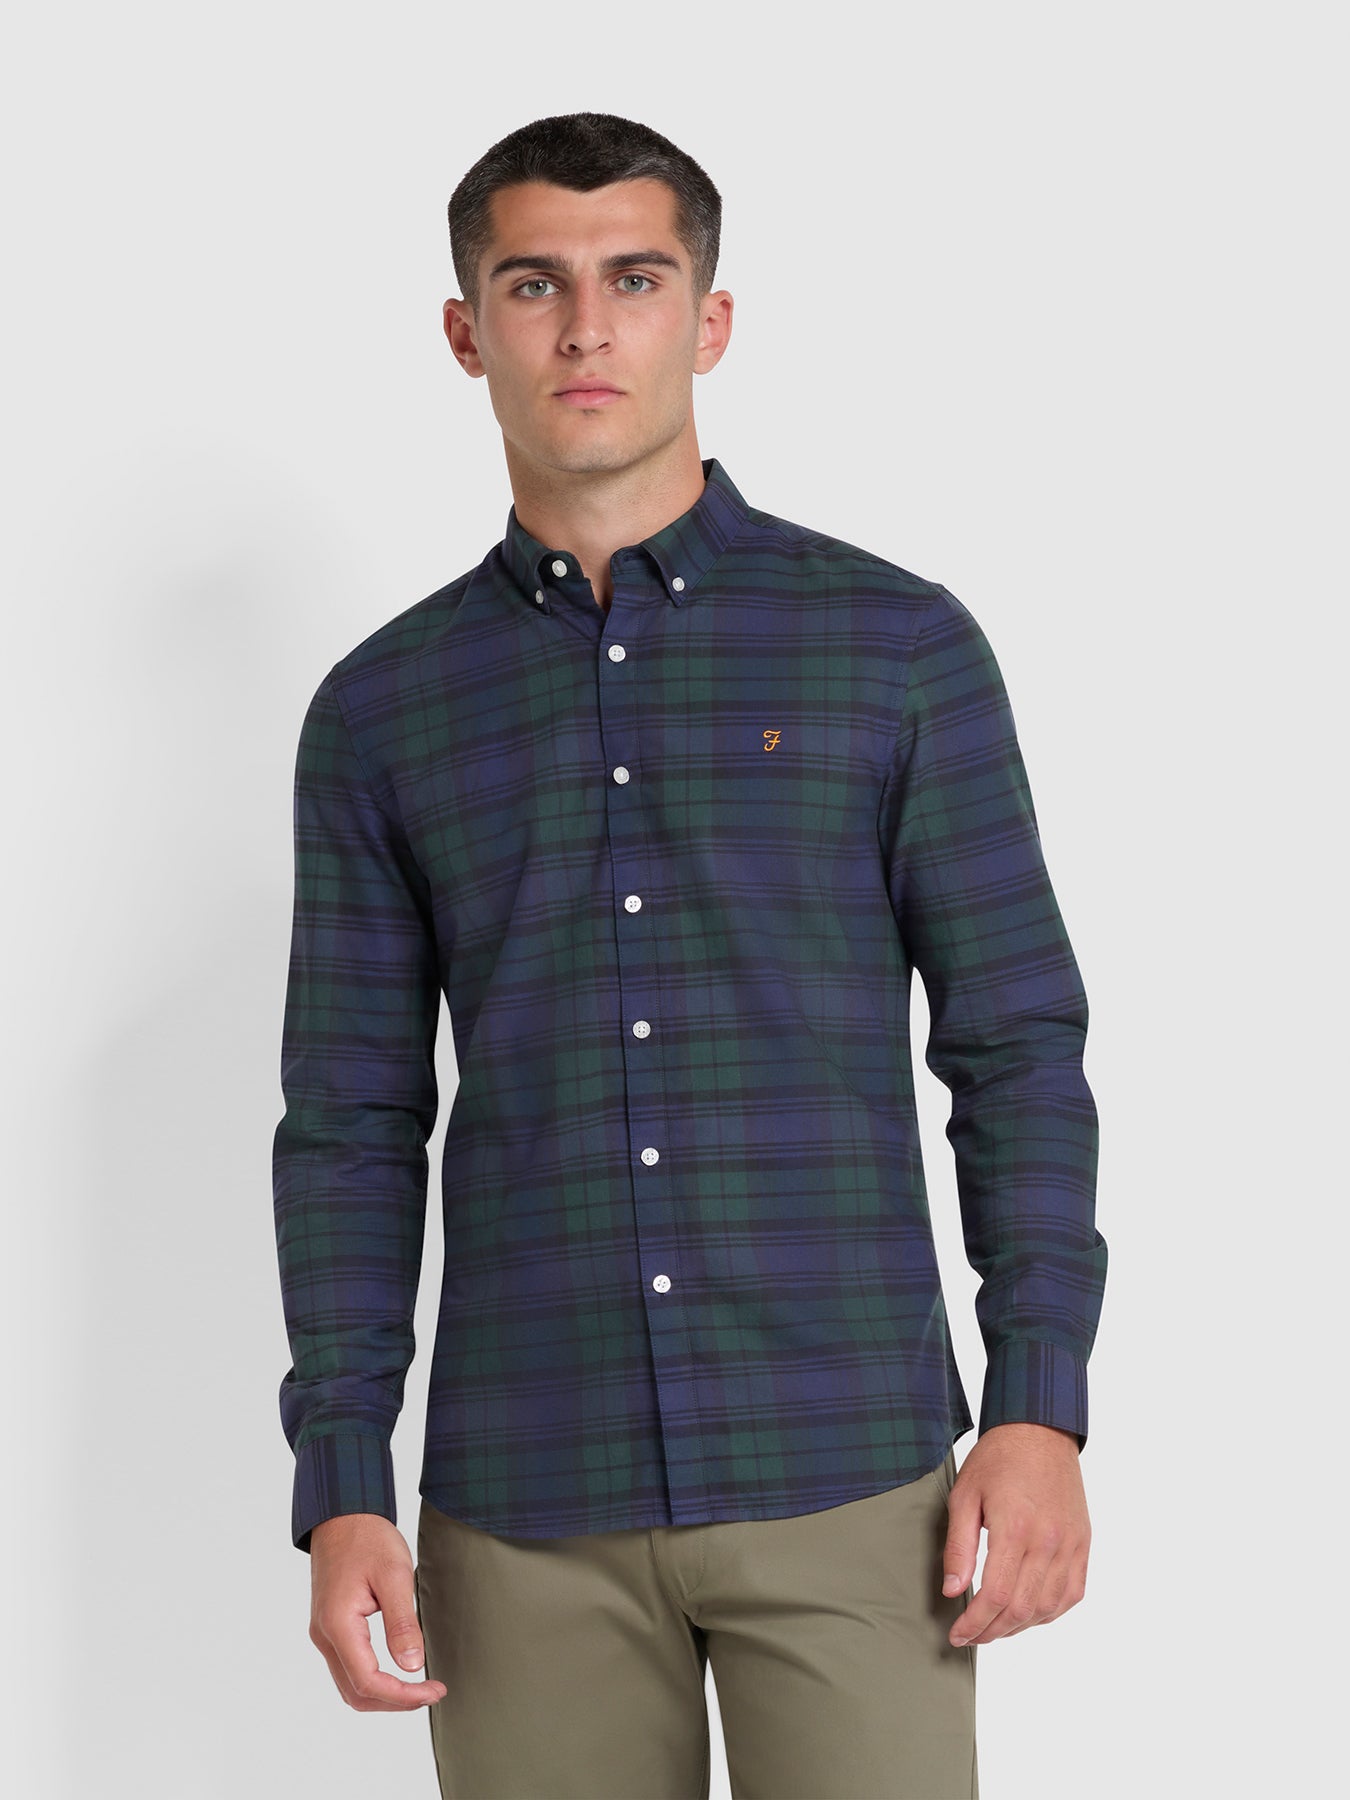 View Brewer Slim Fit Check Organic Cotton Oxford Shirt In Woodland Pine information